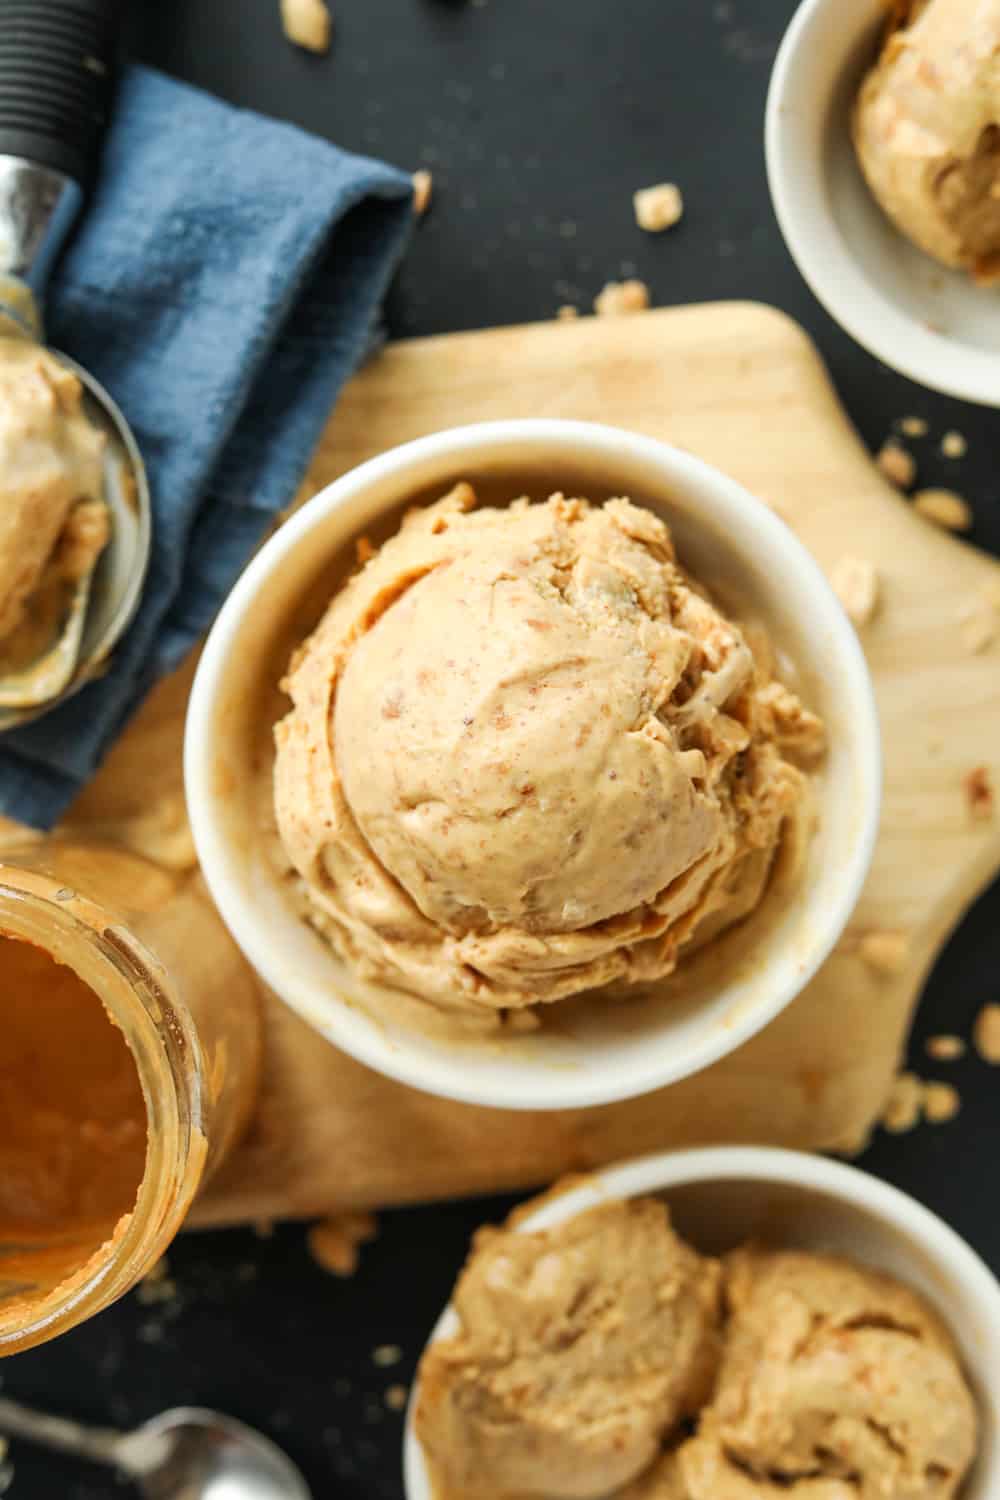 Three white bowls filled with peanut butter ice cream. One of the bowls is set on a wooden cutting board next to it is a blue napkin and a jar of peanut butter.